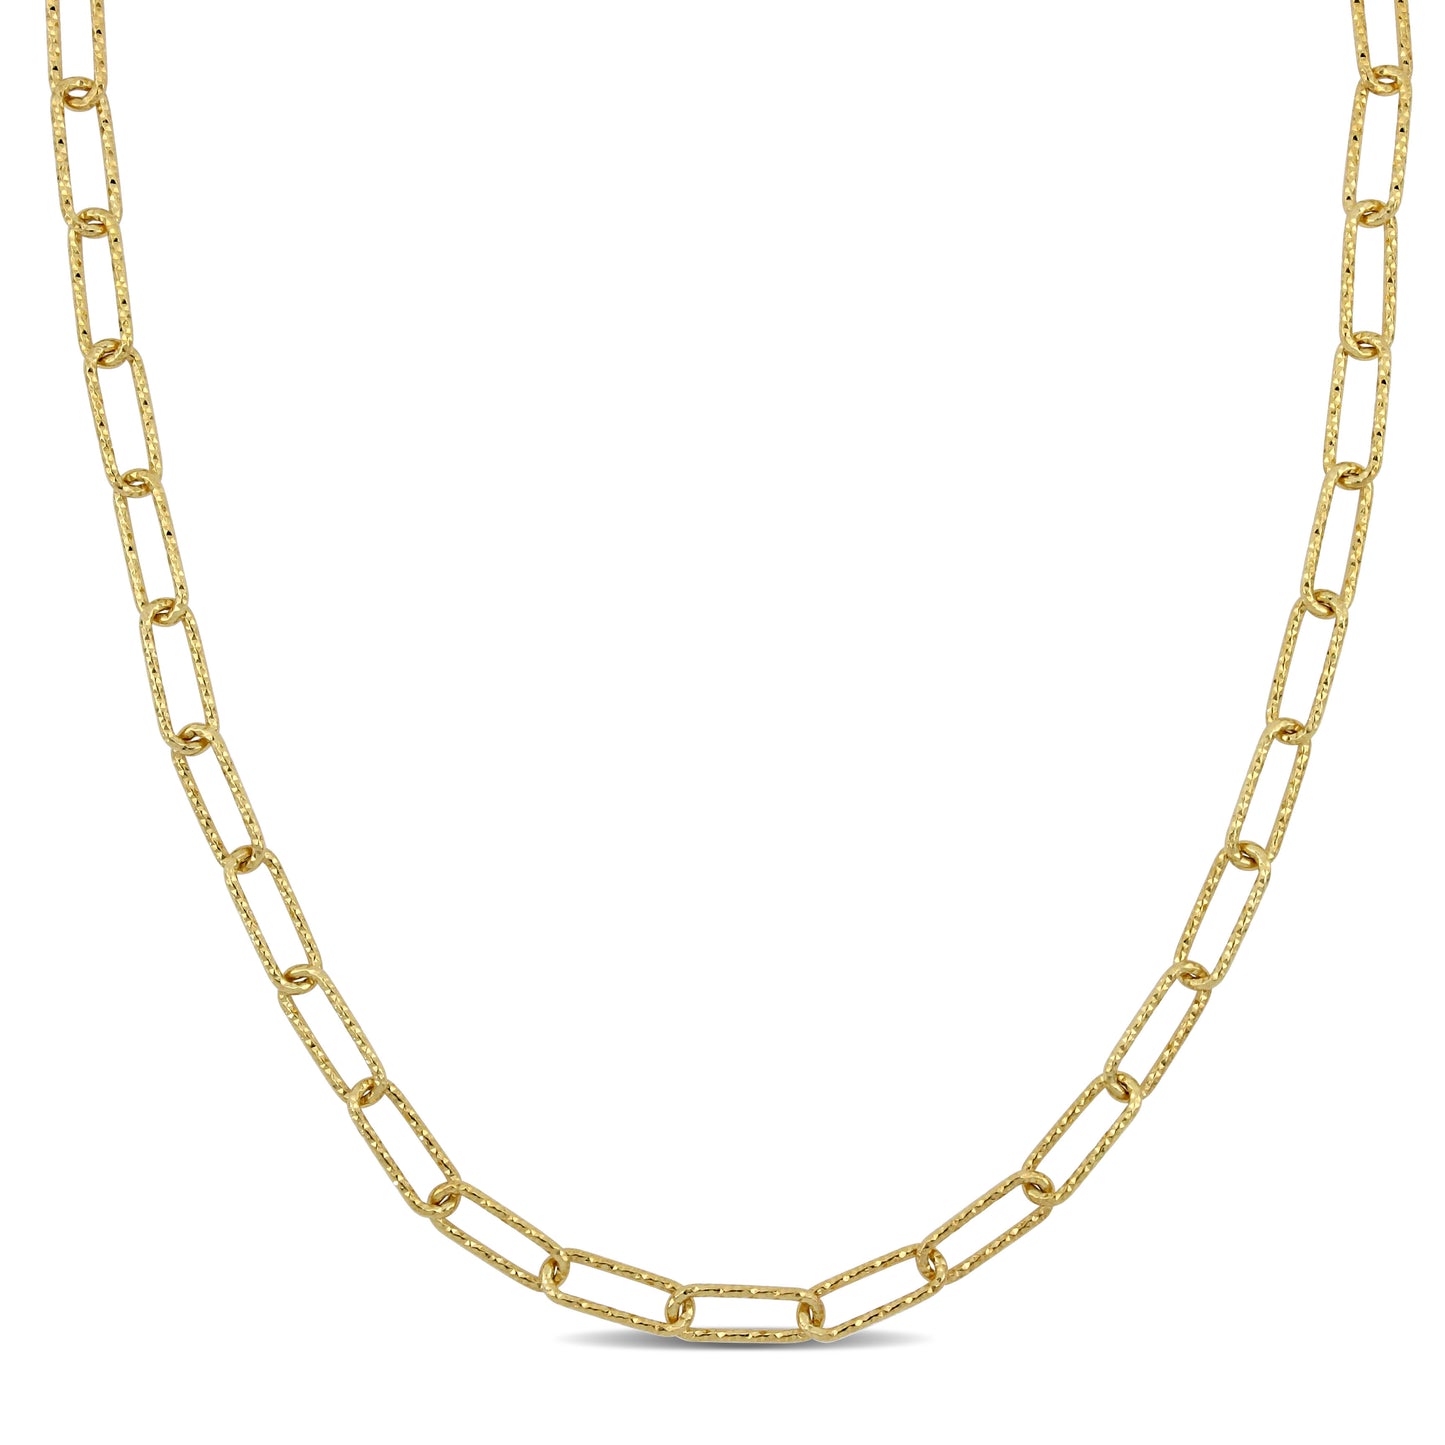 Paperclip Textured Chain in Yellow Gold 5mm